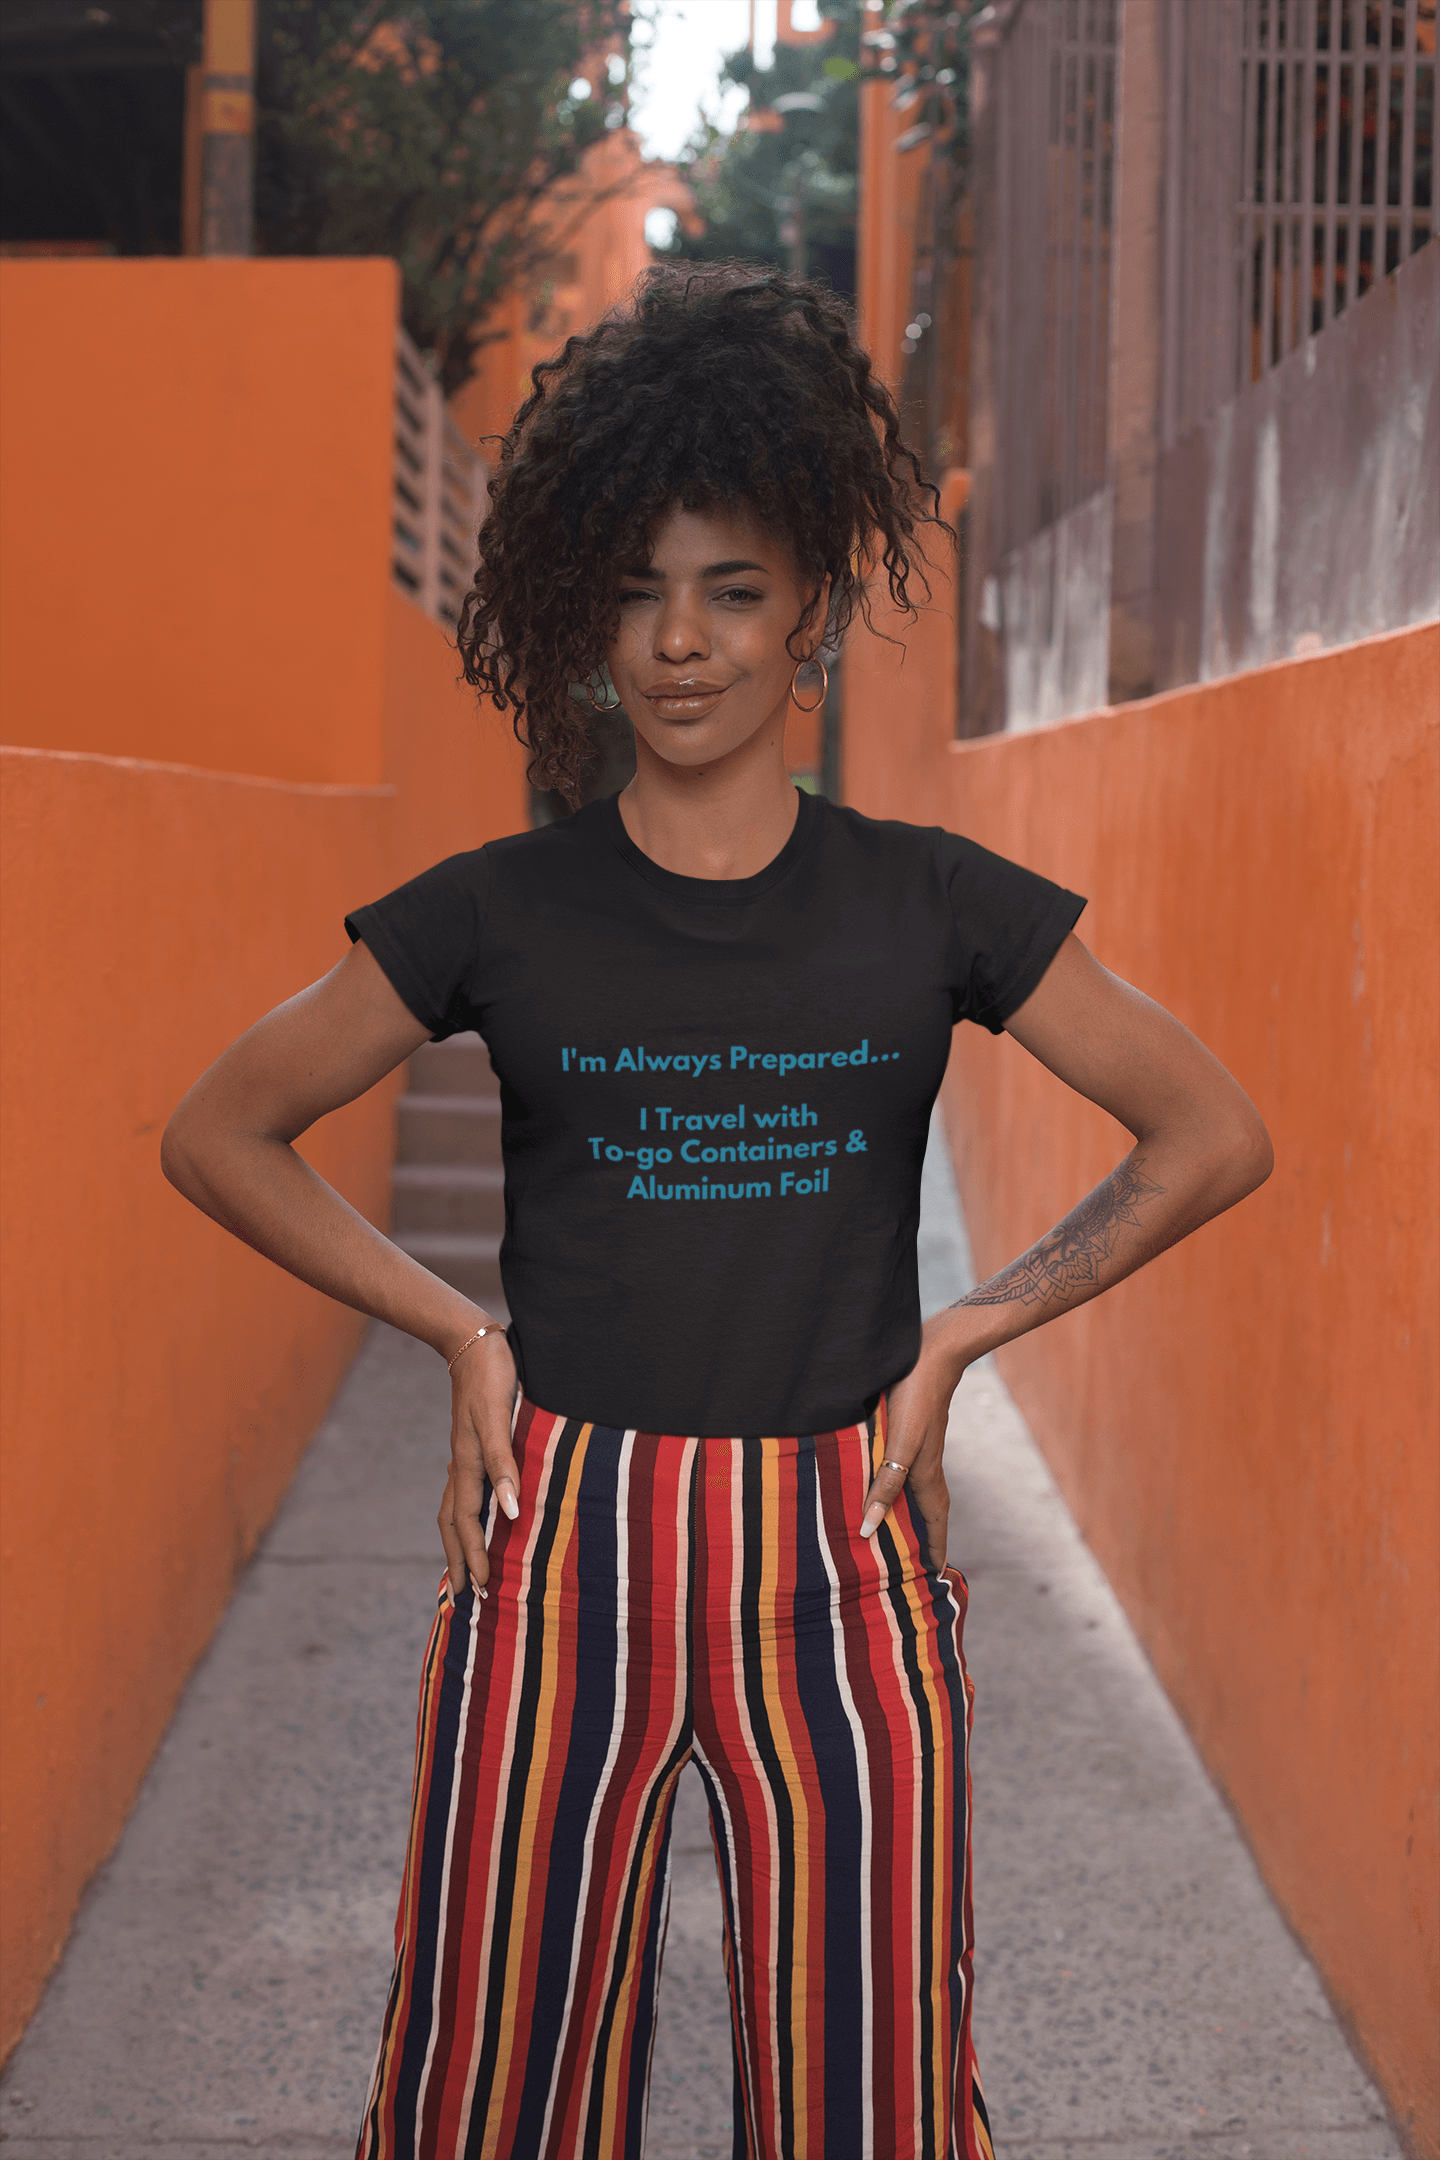 I'm Always Prepared Tee - Sharp Tact Kreativ | Tees & Gifts with Encouraging Messages to Brighten Your Day with a Bit of Wit